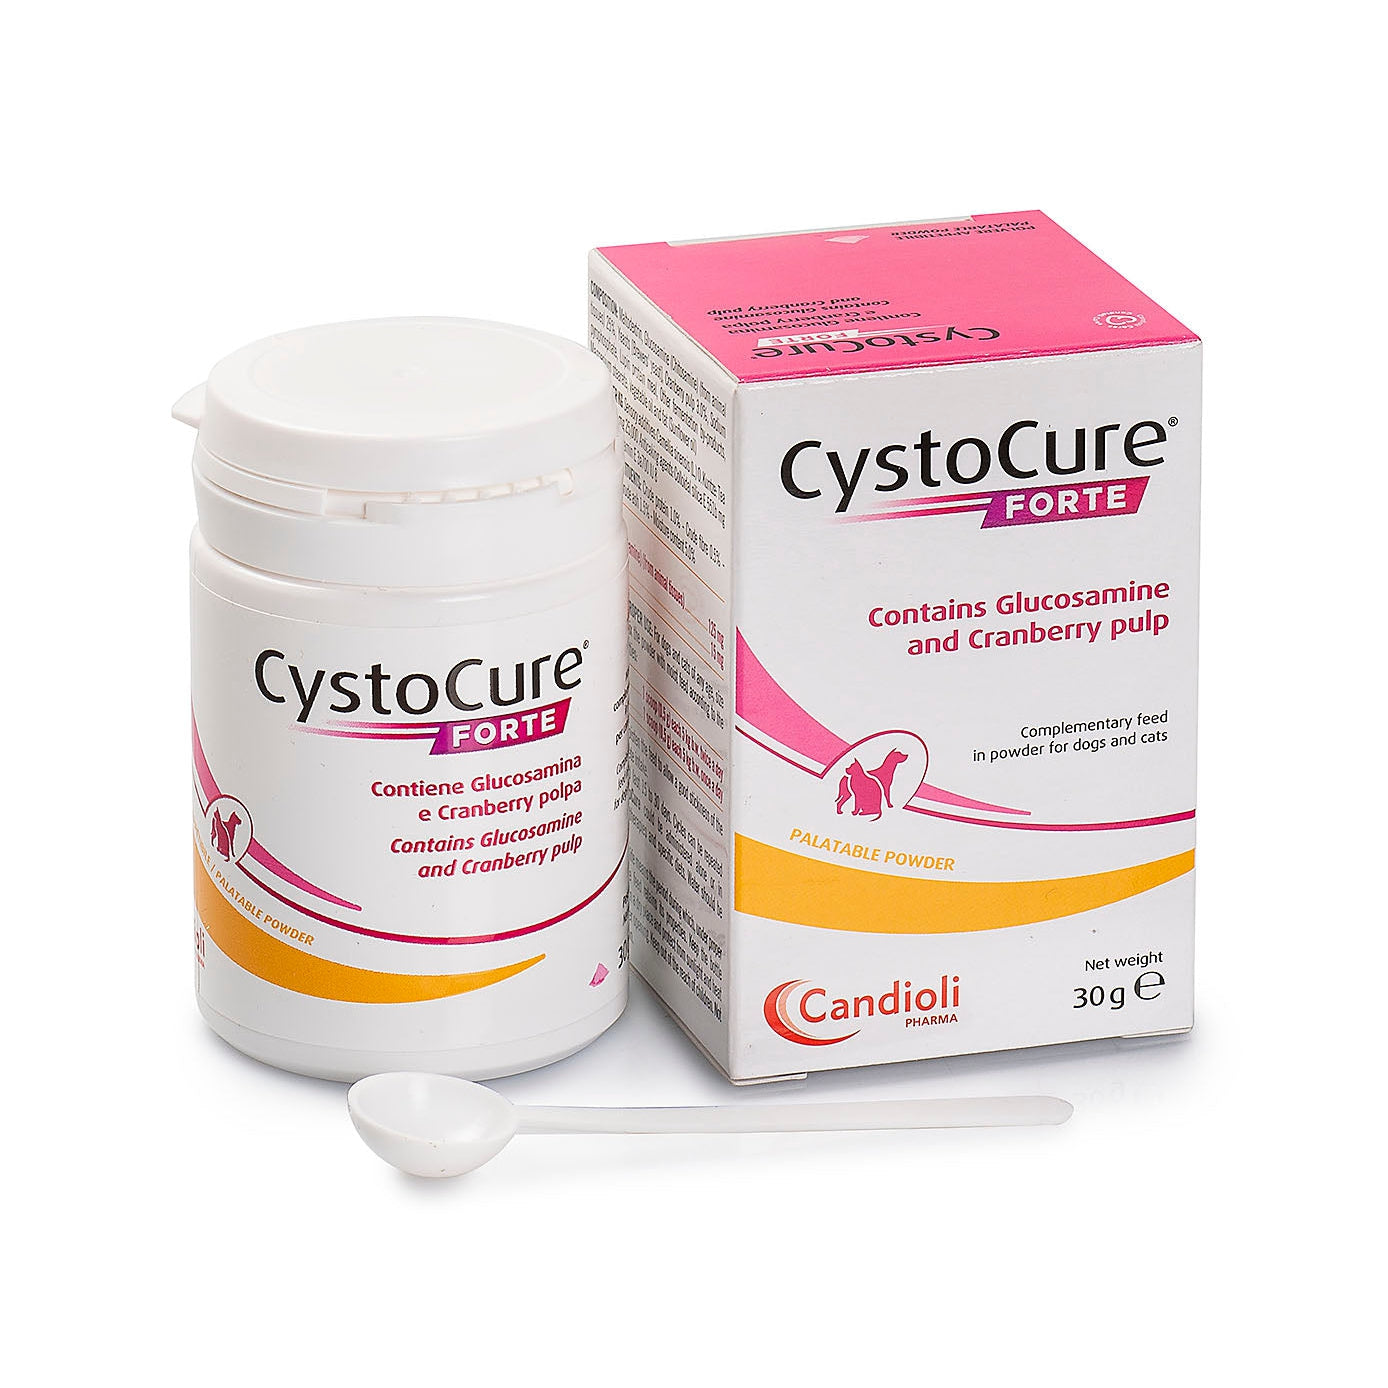 CystoCure Forte powder for dogs and cats